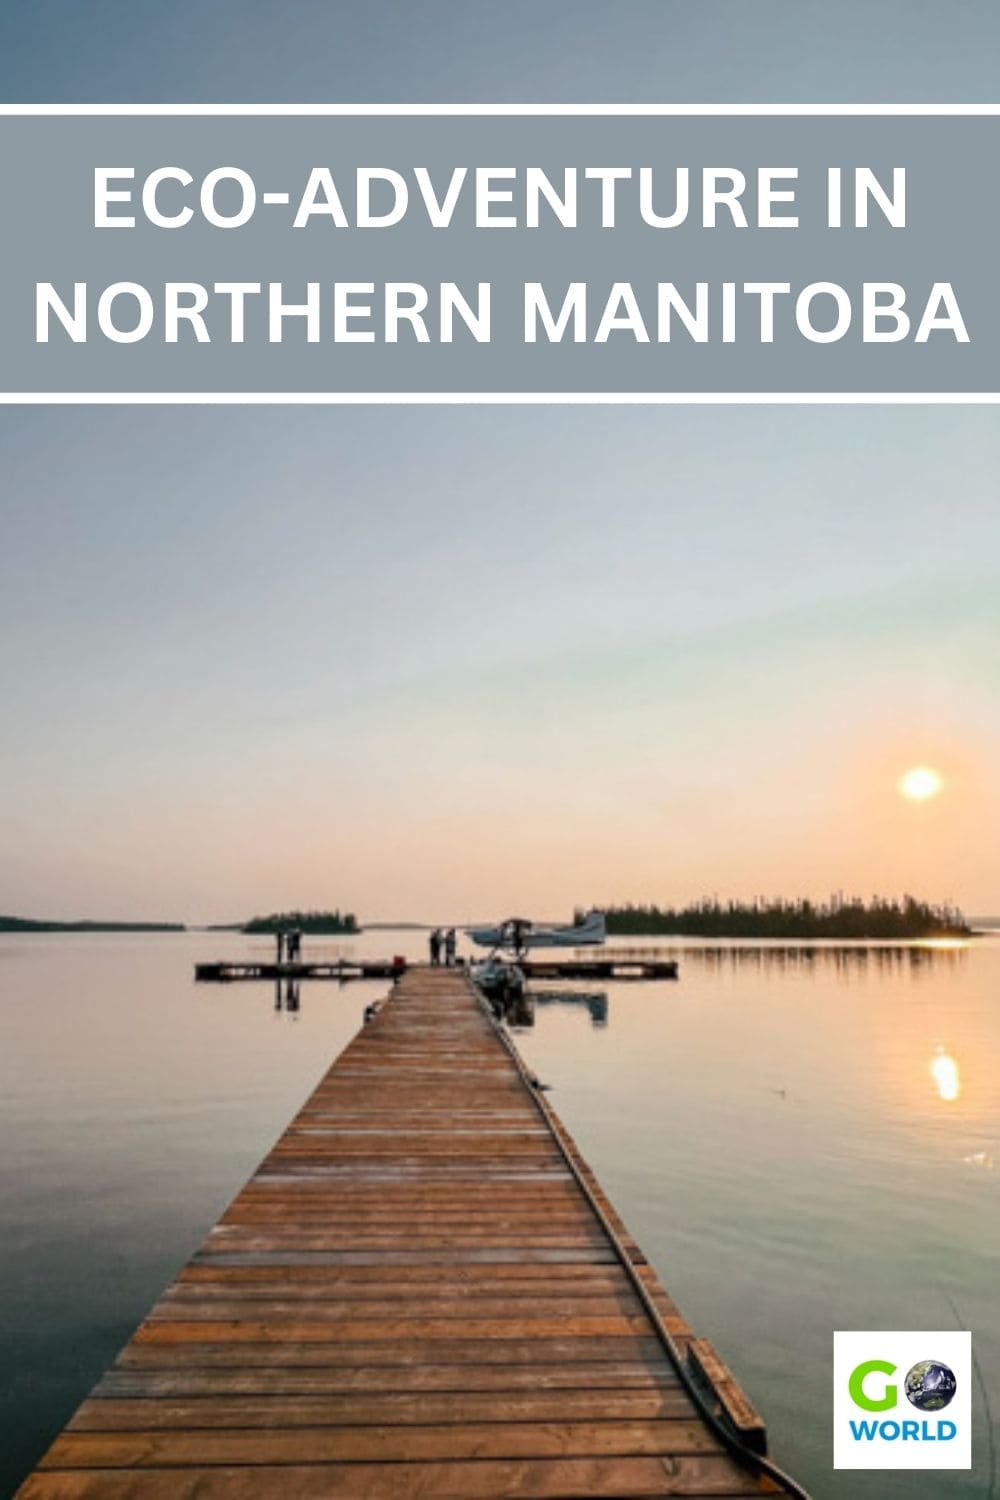 Visit Ganglers North Seal River Lodge in northern Manitoba for off-the-beaten-path eco-adventures, fishing and pristine nature in comfort. #Manitoba